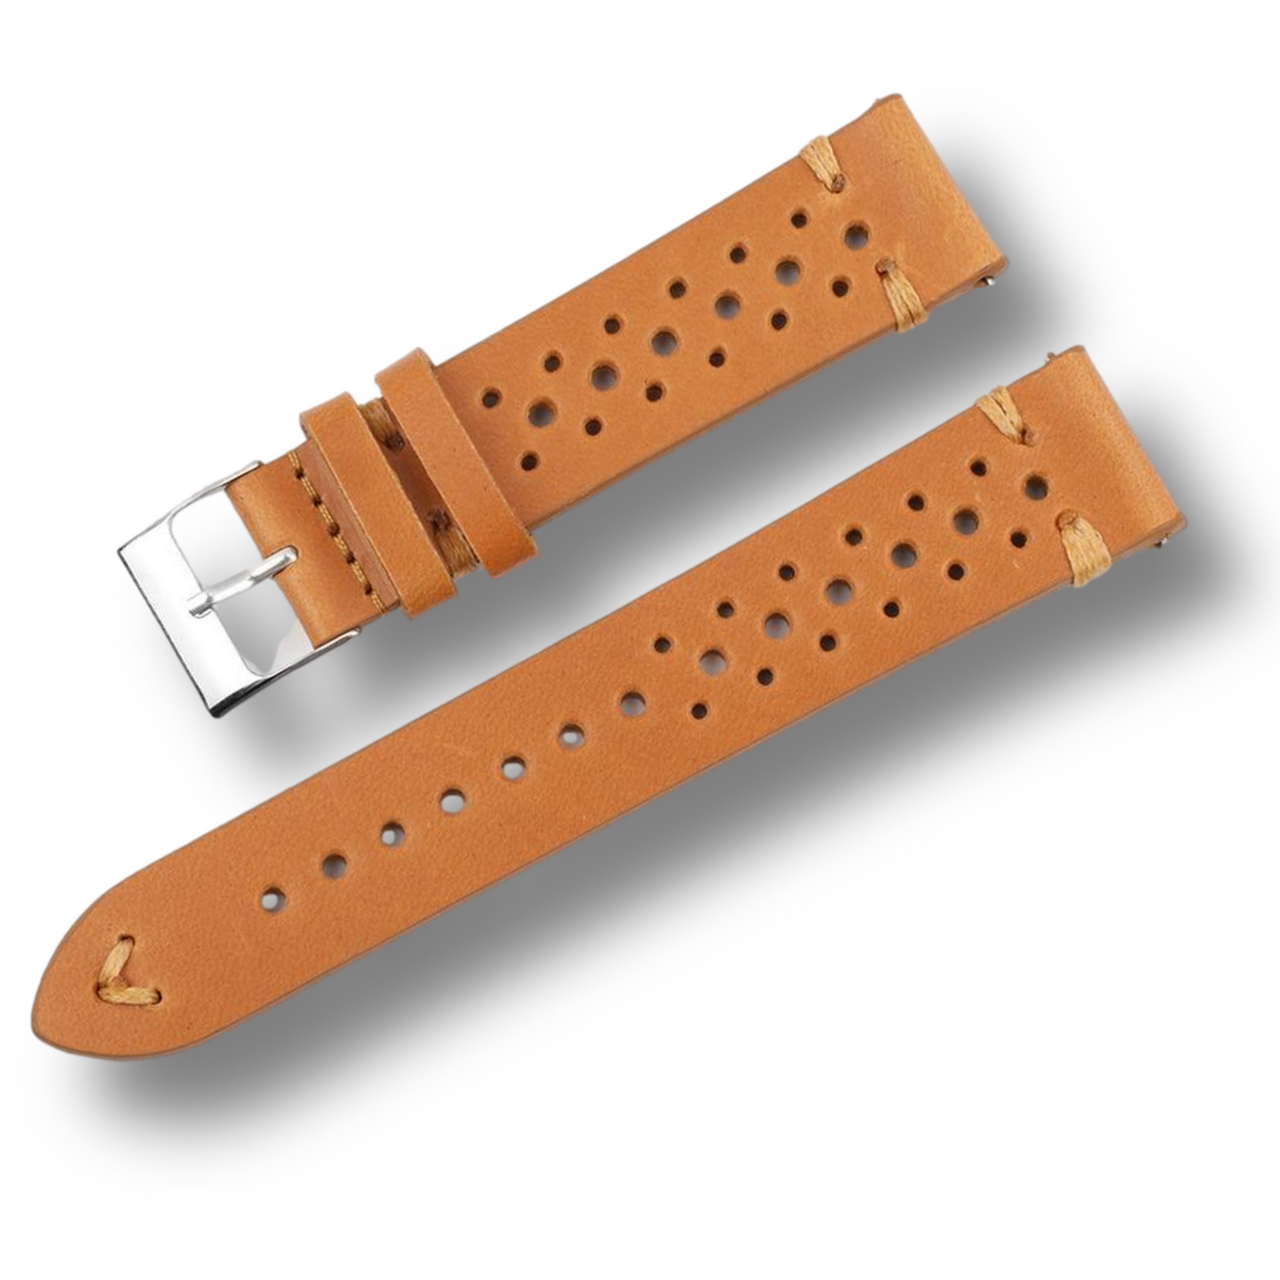 Classic Rally Road Worn Leather Strap with Quick Release - watchband.direct